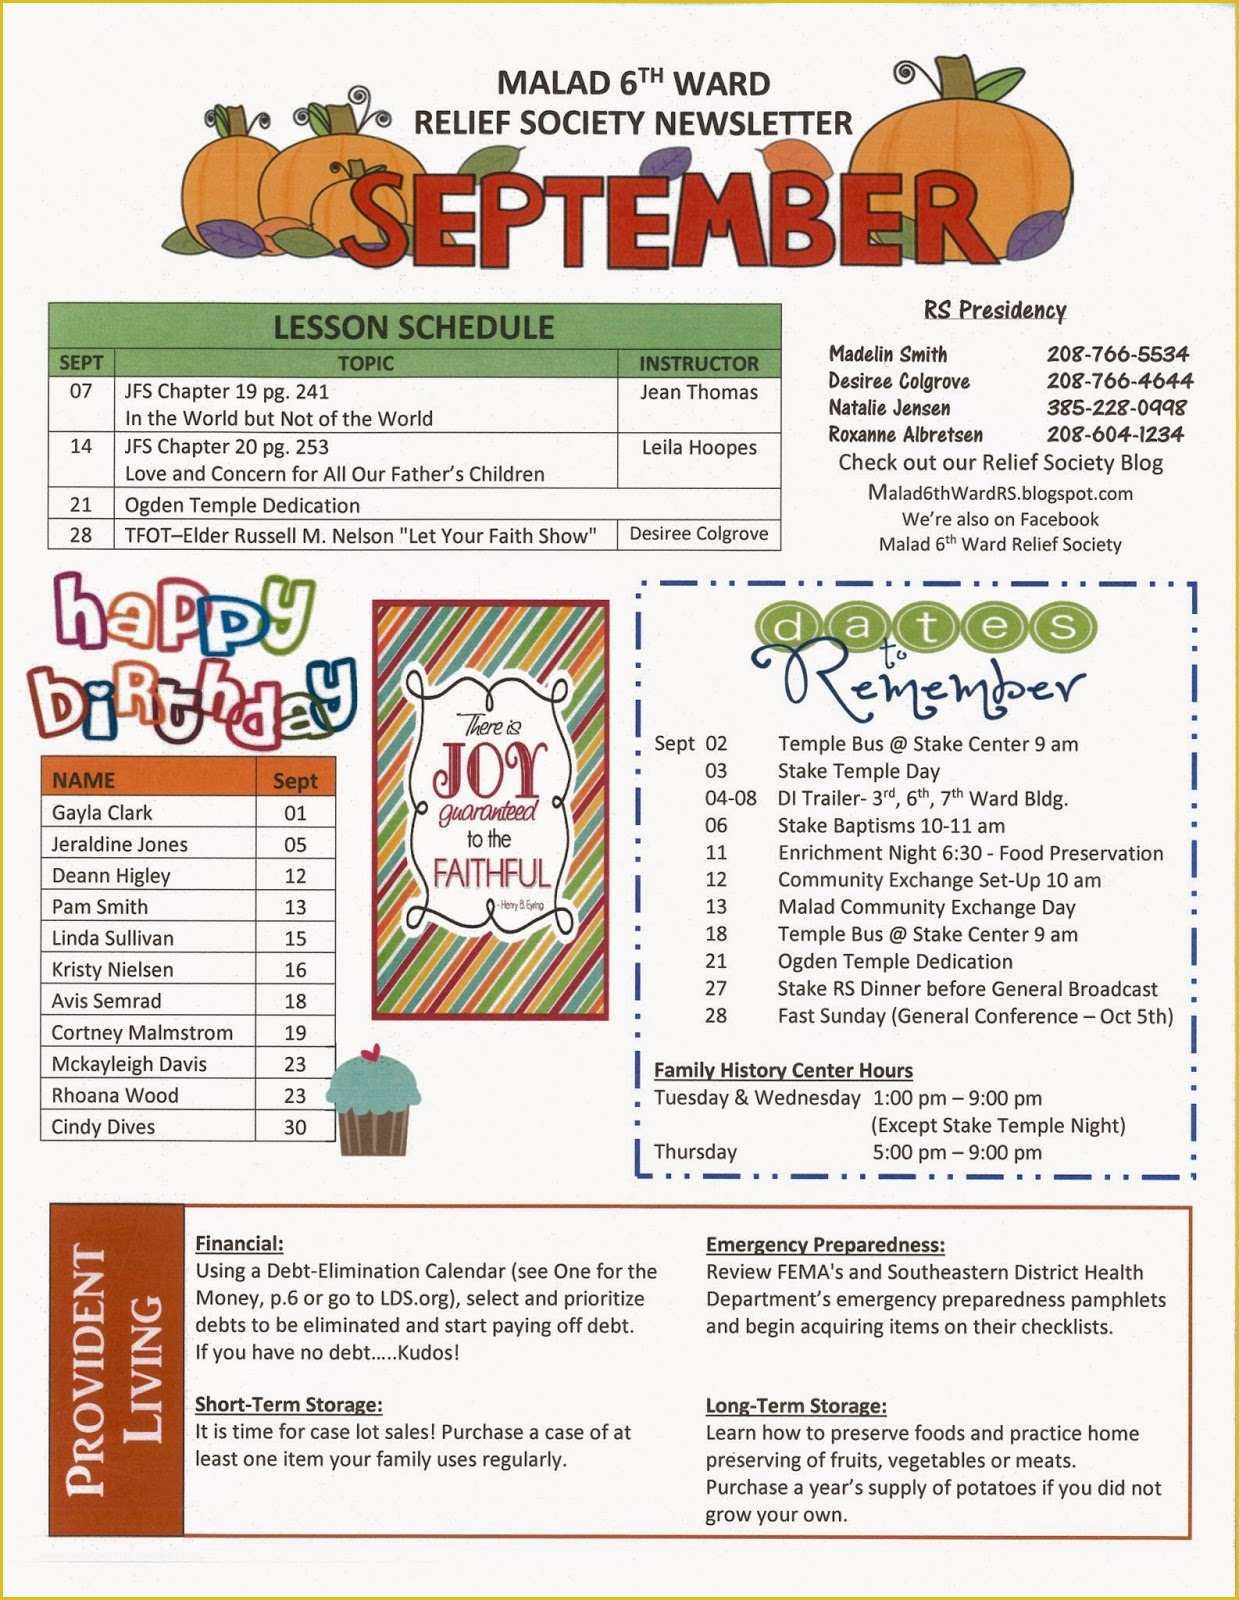 Relief society Newsletter Template Free Of Malad 6th Ward Relief society Blog September Newsletter